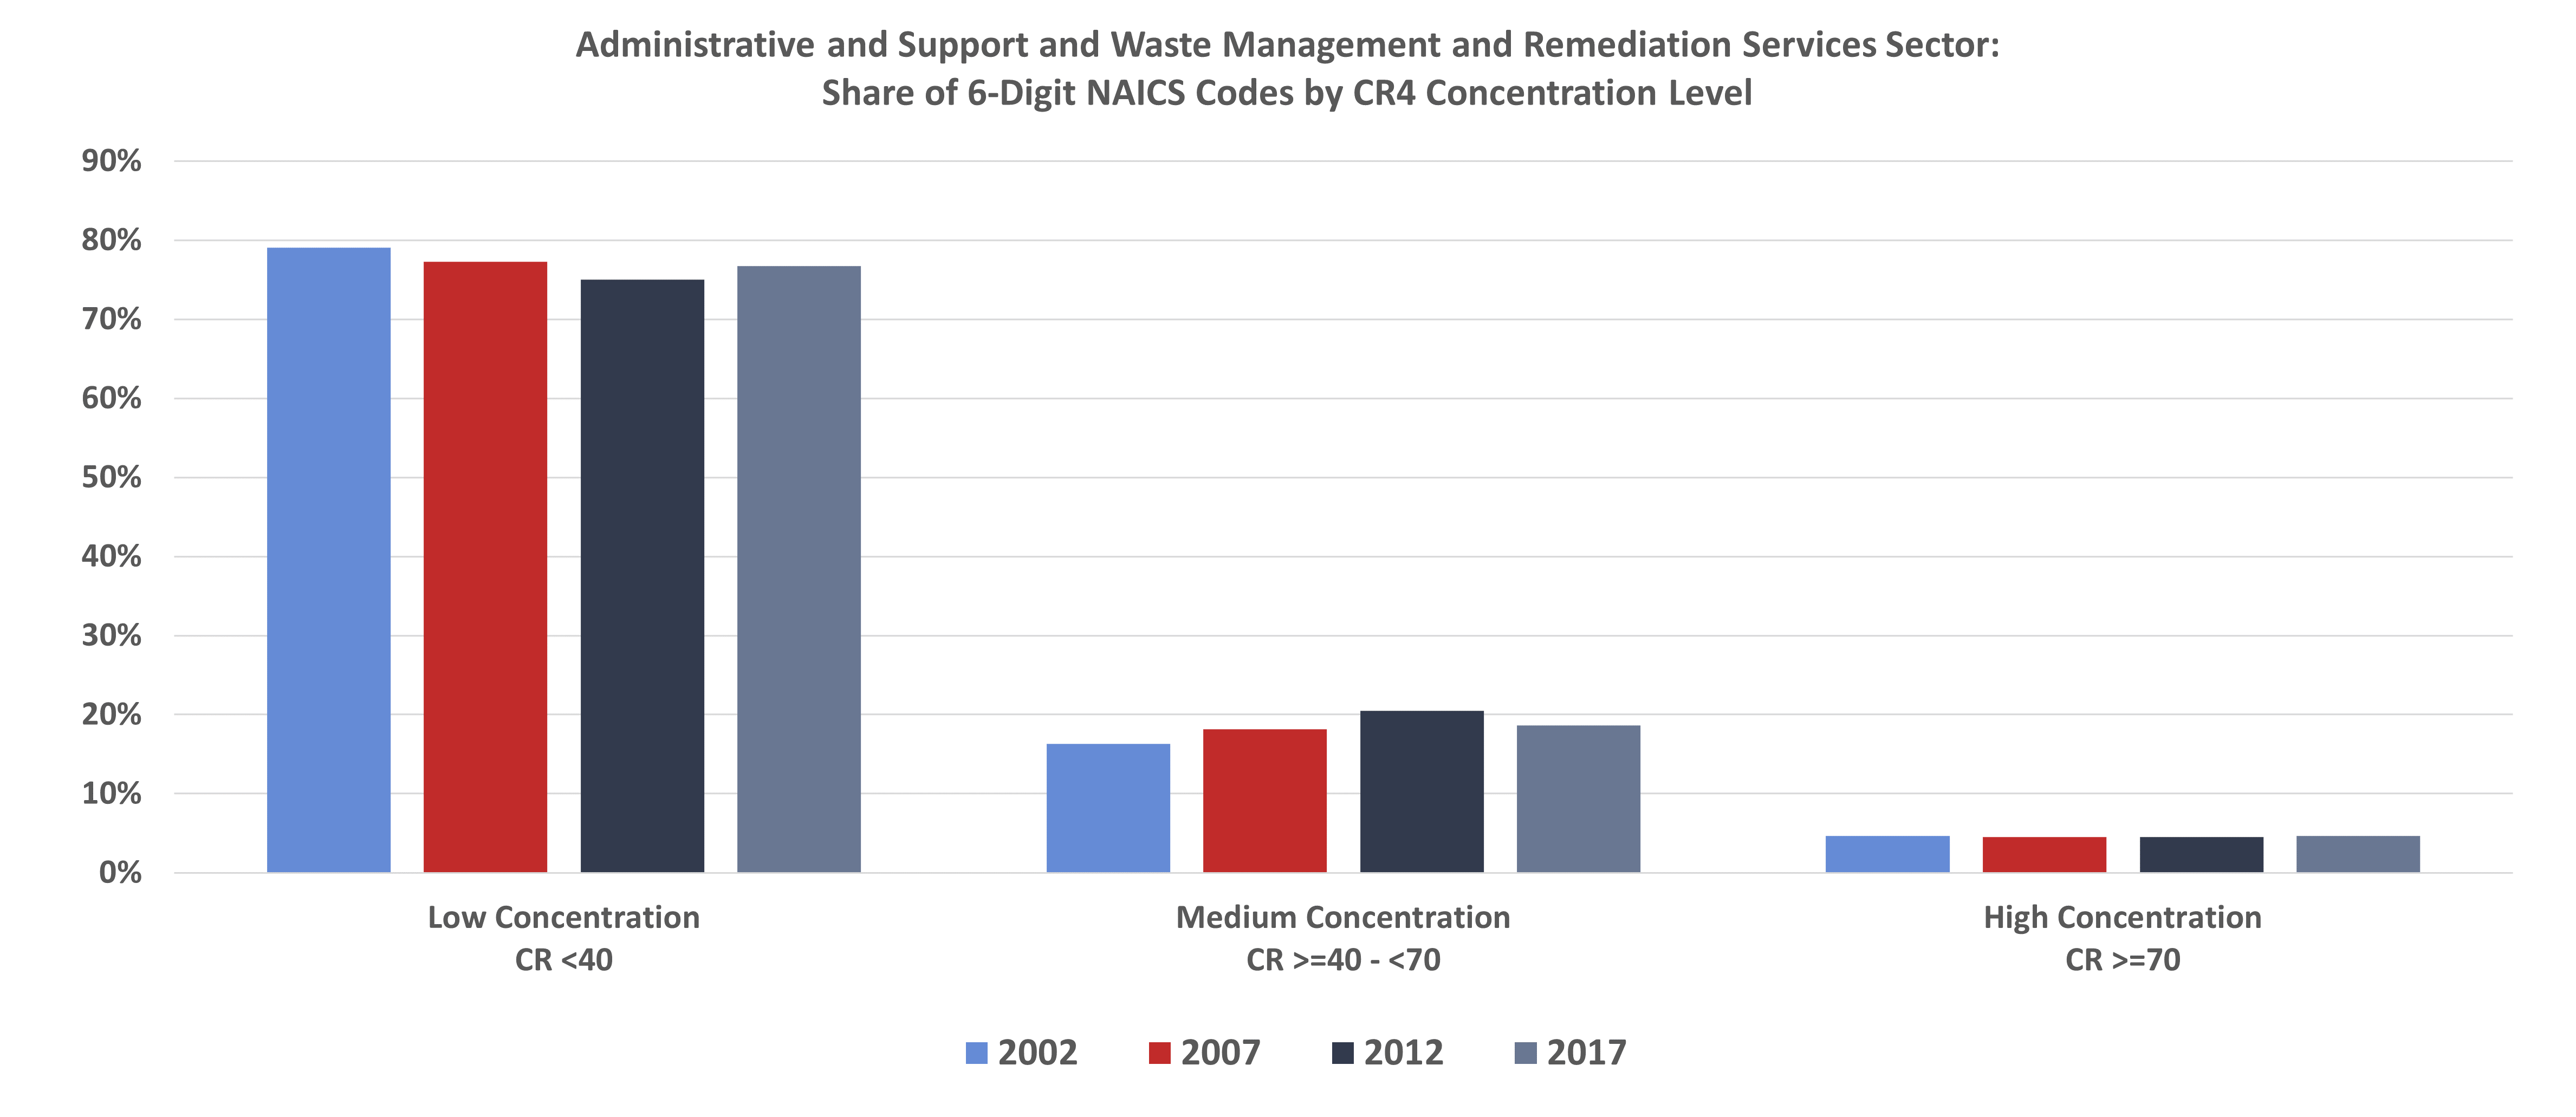 Administrative and Support and Waste Management and Remediation Services Sector: Share of 6-Digit NAICS Codes by CR4 Concentration Level